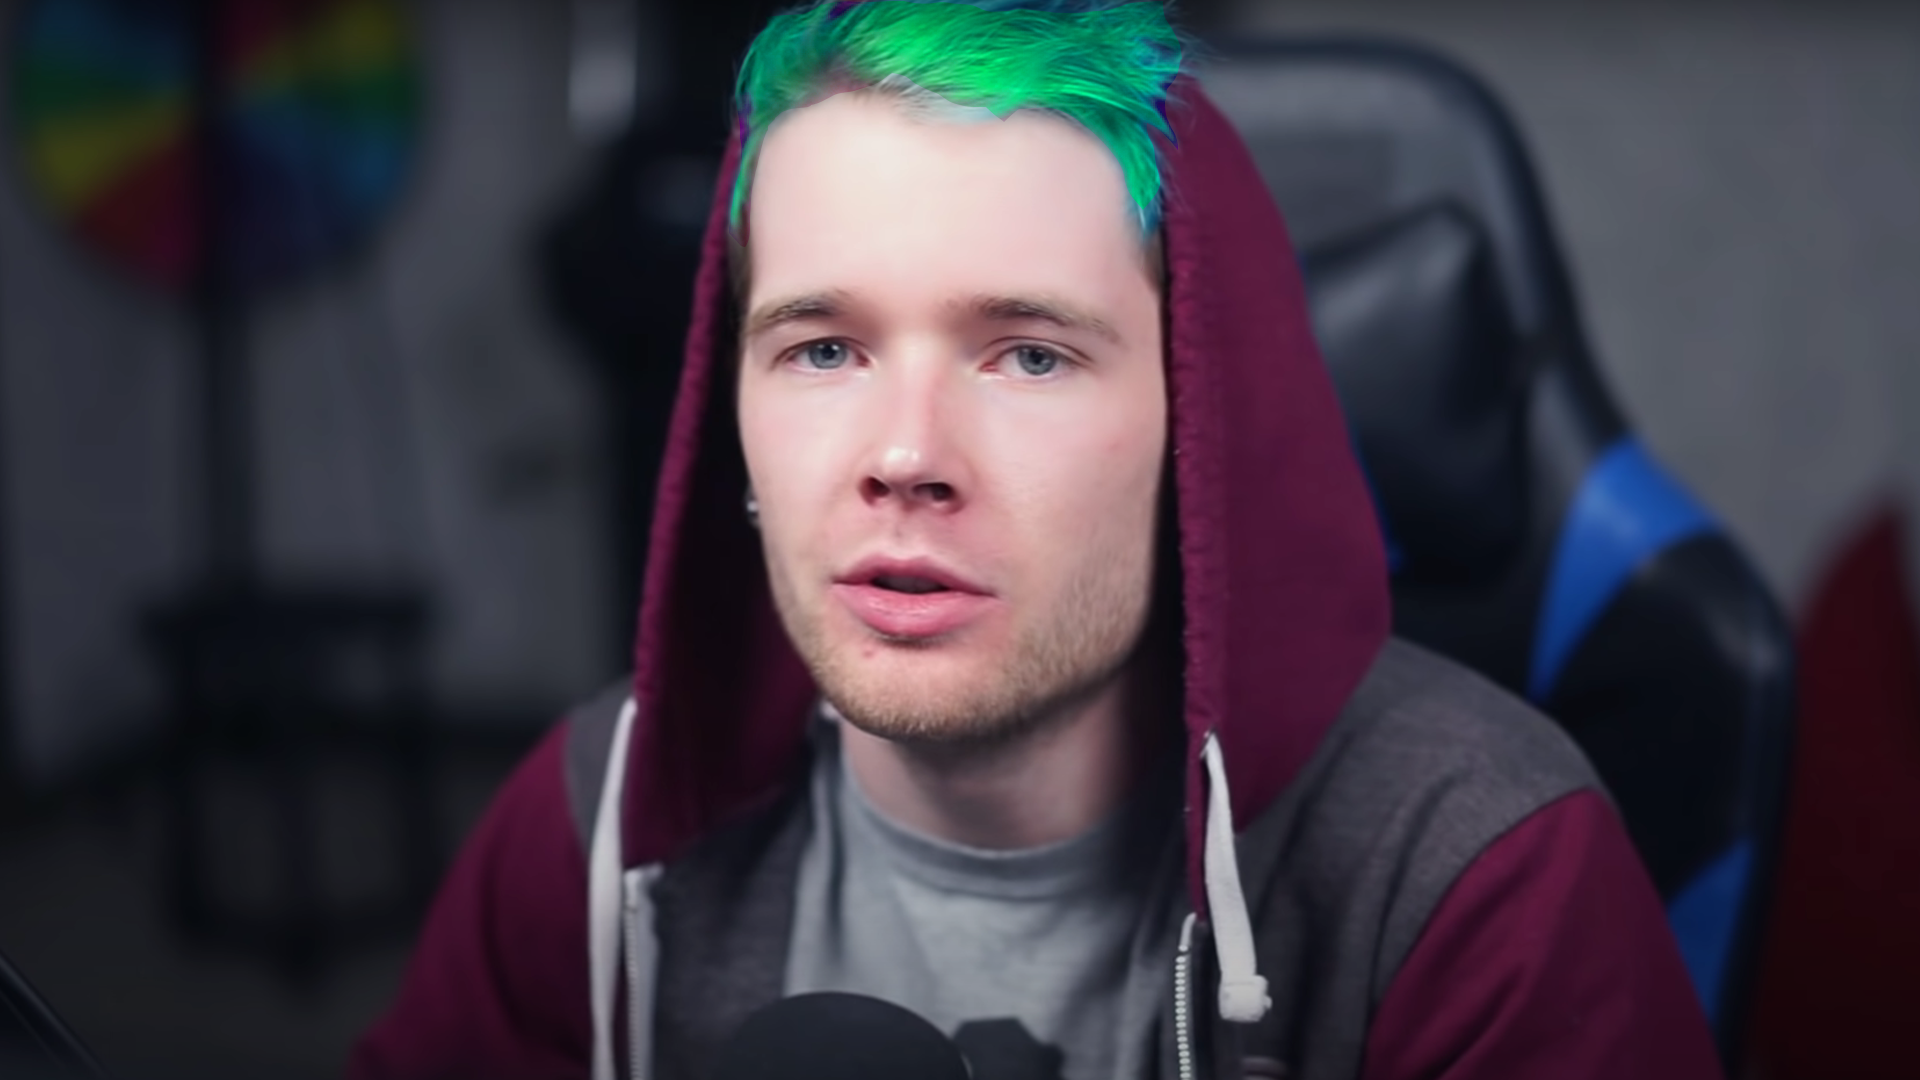 Dantdm's New Hair: The Pink and Blue Color! - wide 9